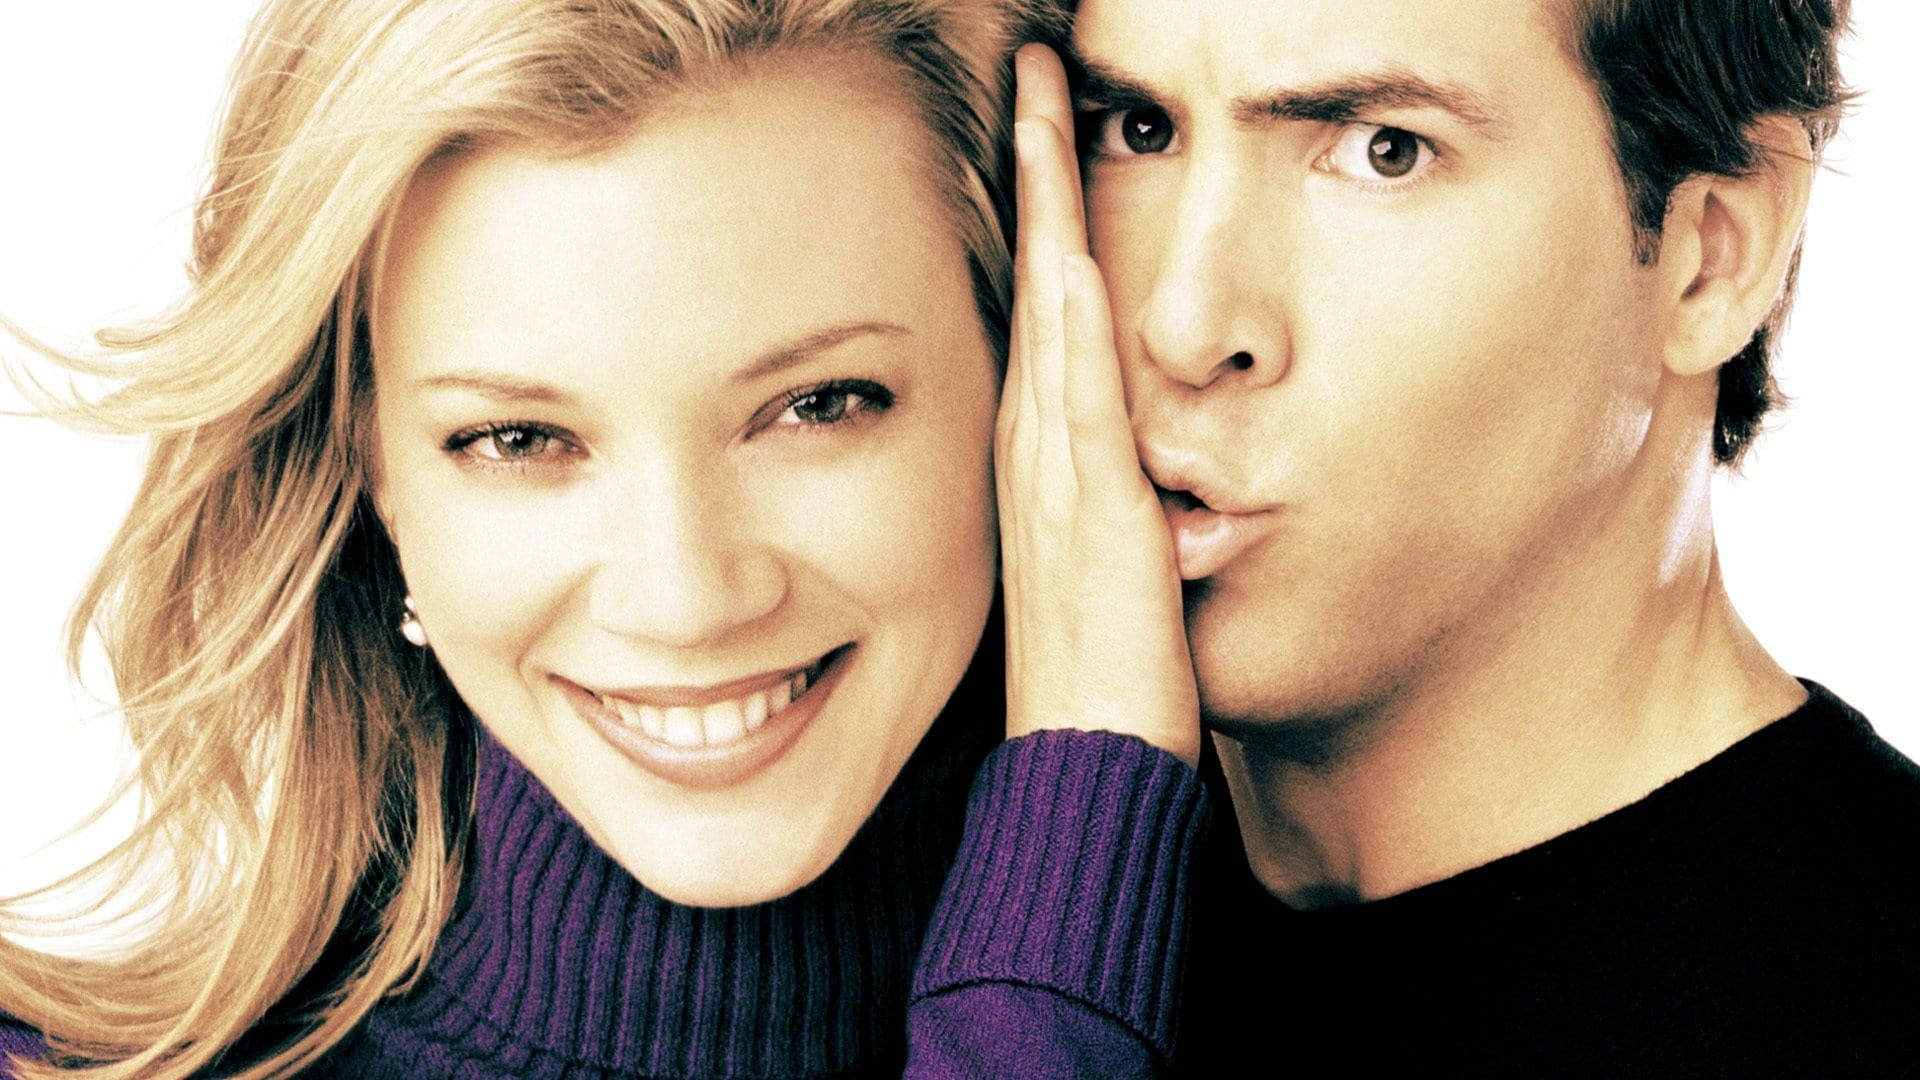 Just Friends - Movies on Google Play